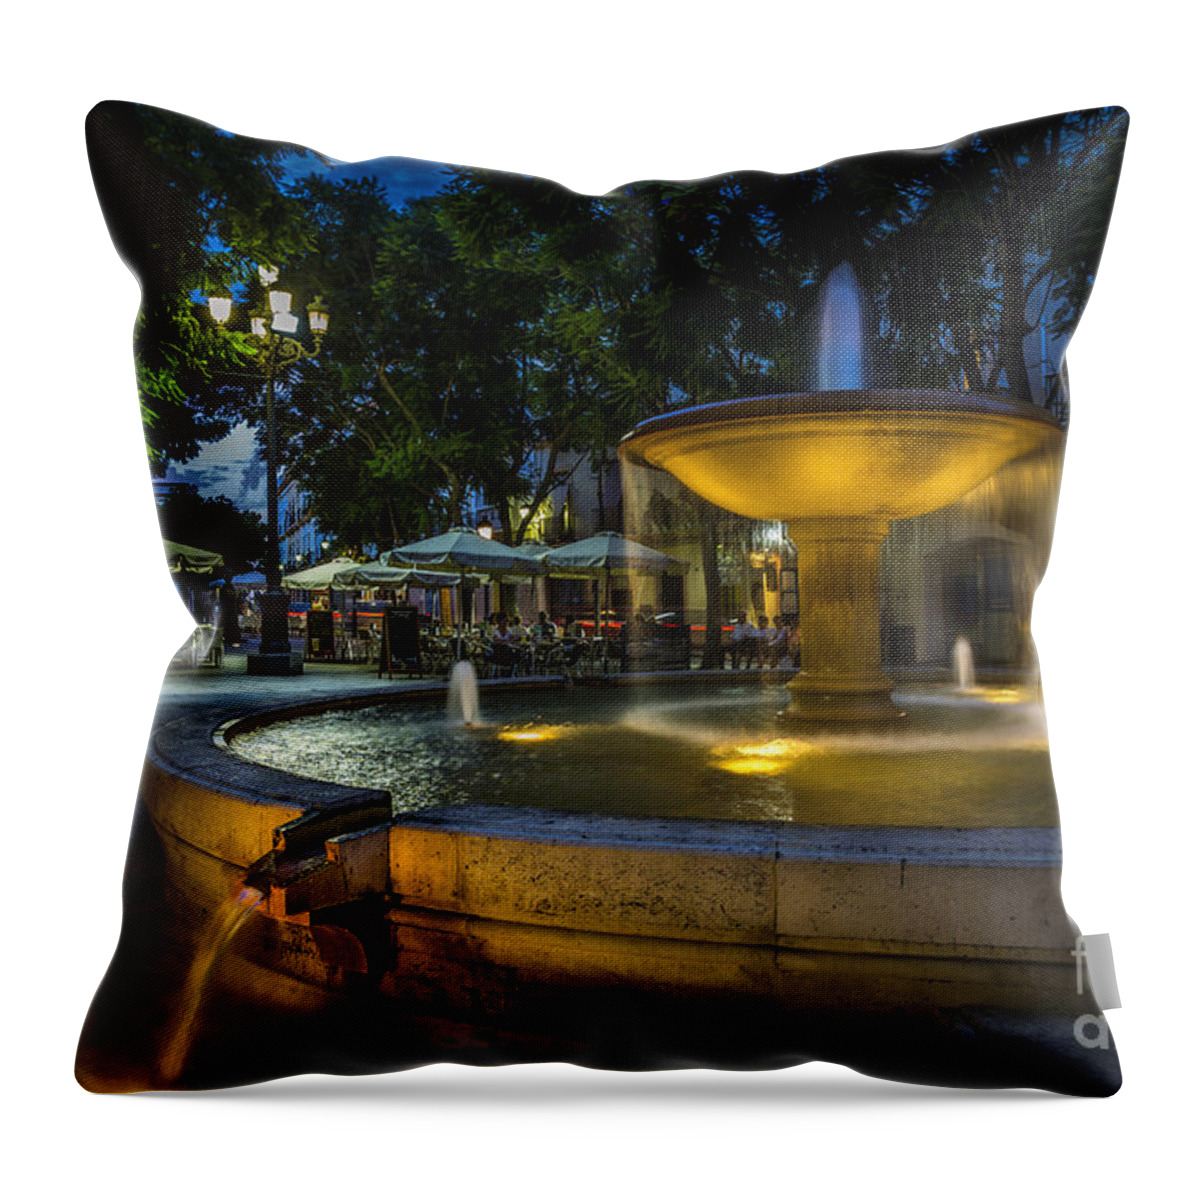 Andalucia Throw Pillow featuring the photograph Liars Square Cadiz Spain by Pablo Avanzini